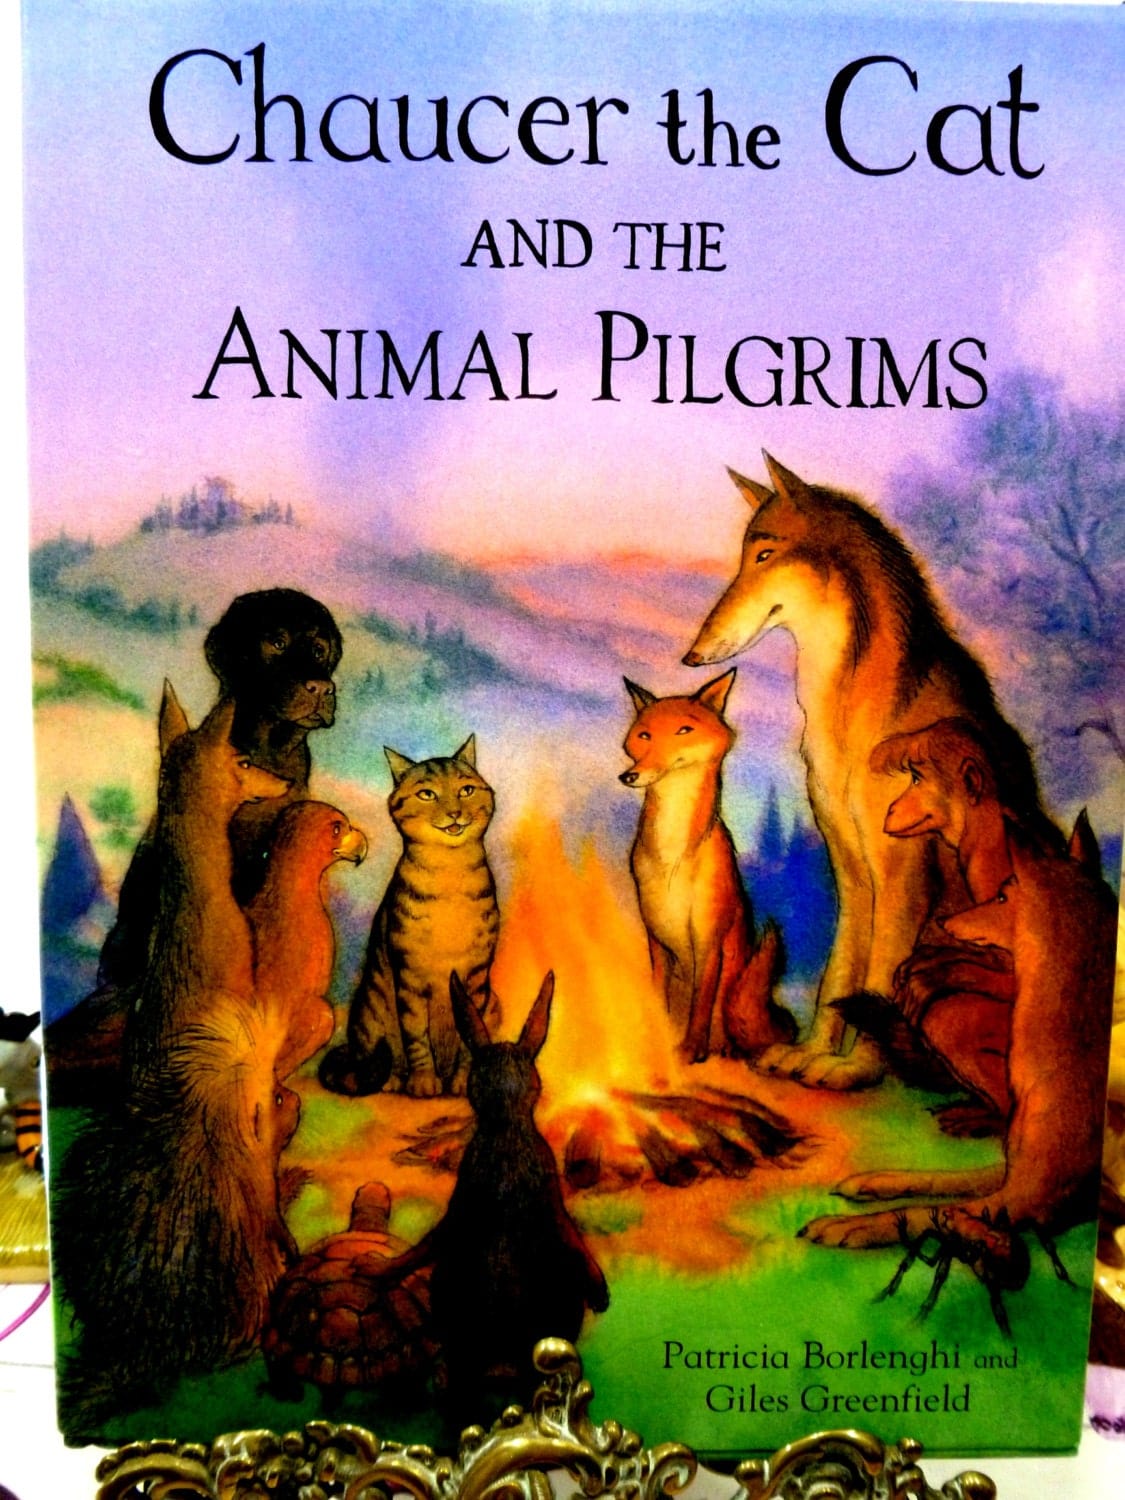 Cover of vintage children's book Chaucer the Cat and the Animal Pilgrims showing animals sat round a campfire. 